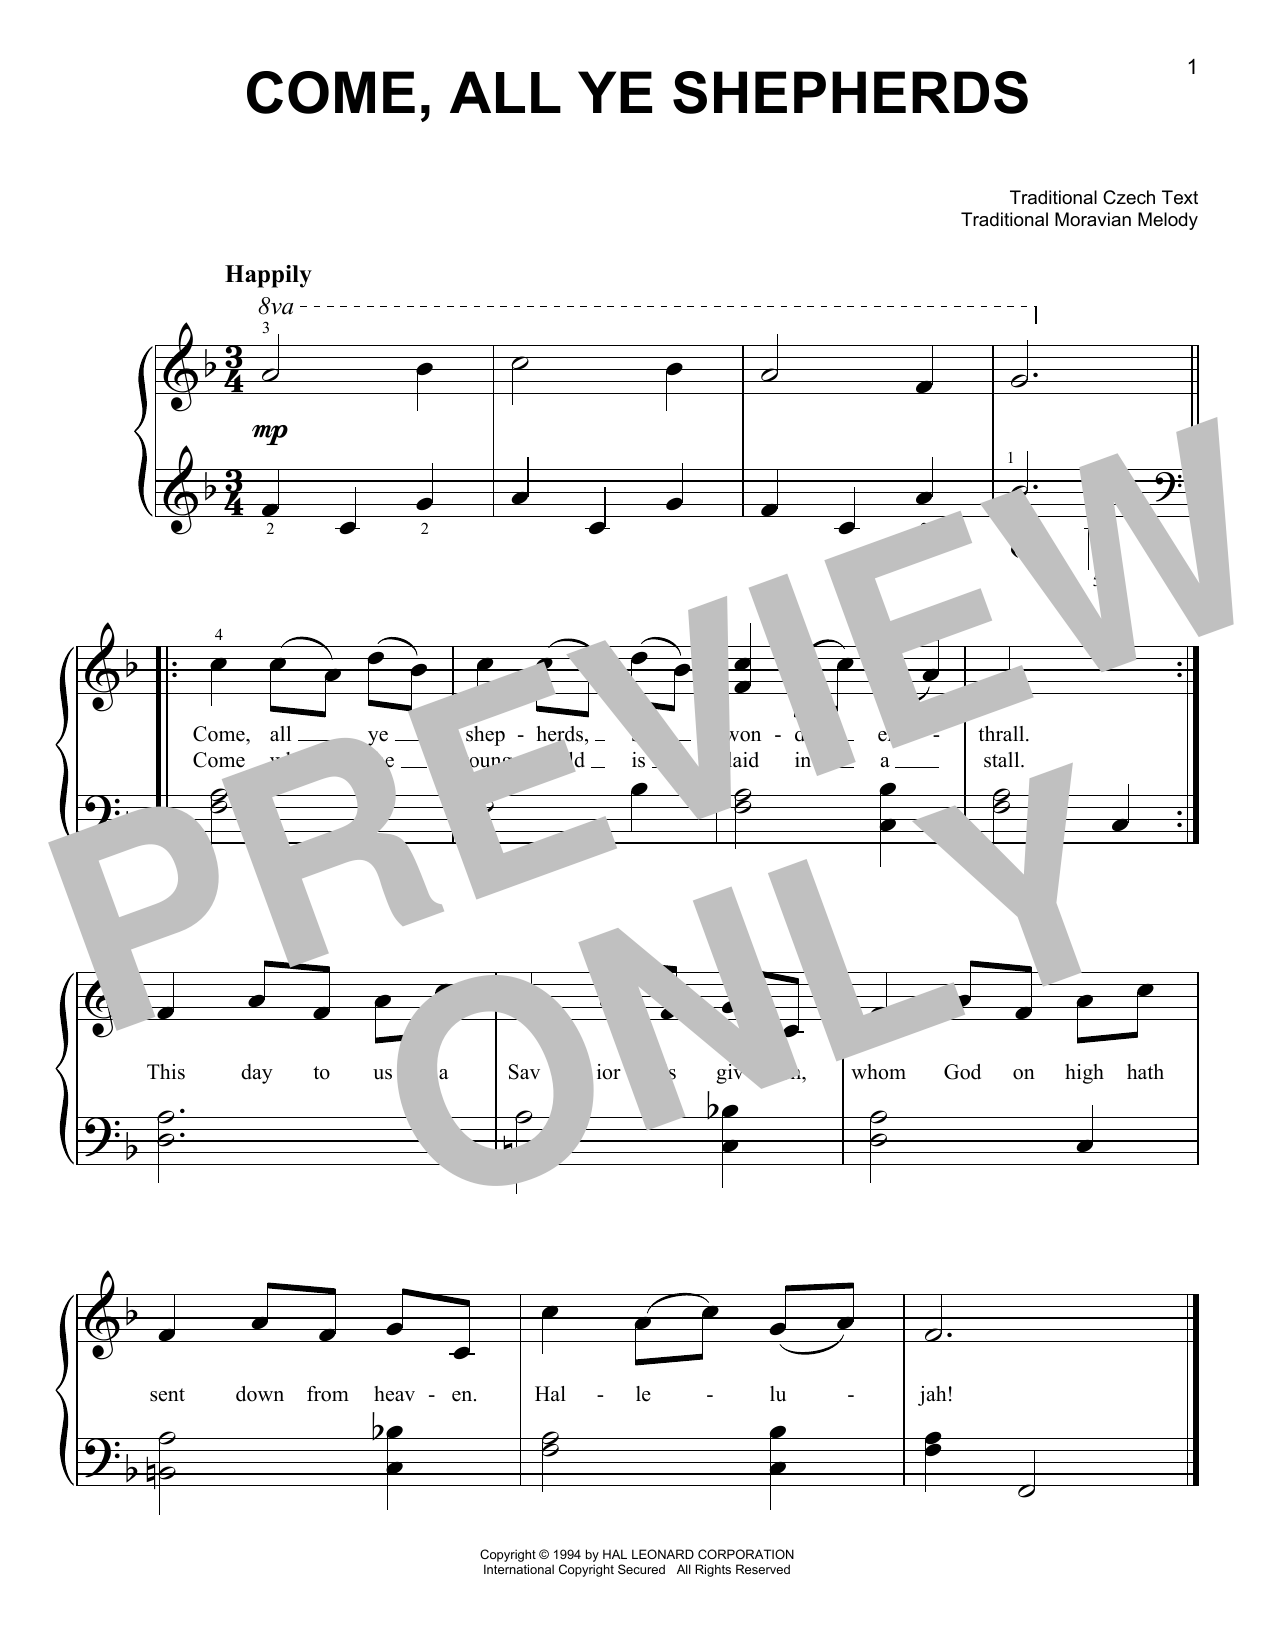 Download Traditional Moravian Melody Come, All Ye Shepherds Sheet Music